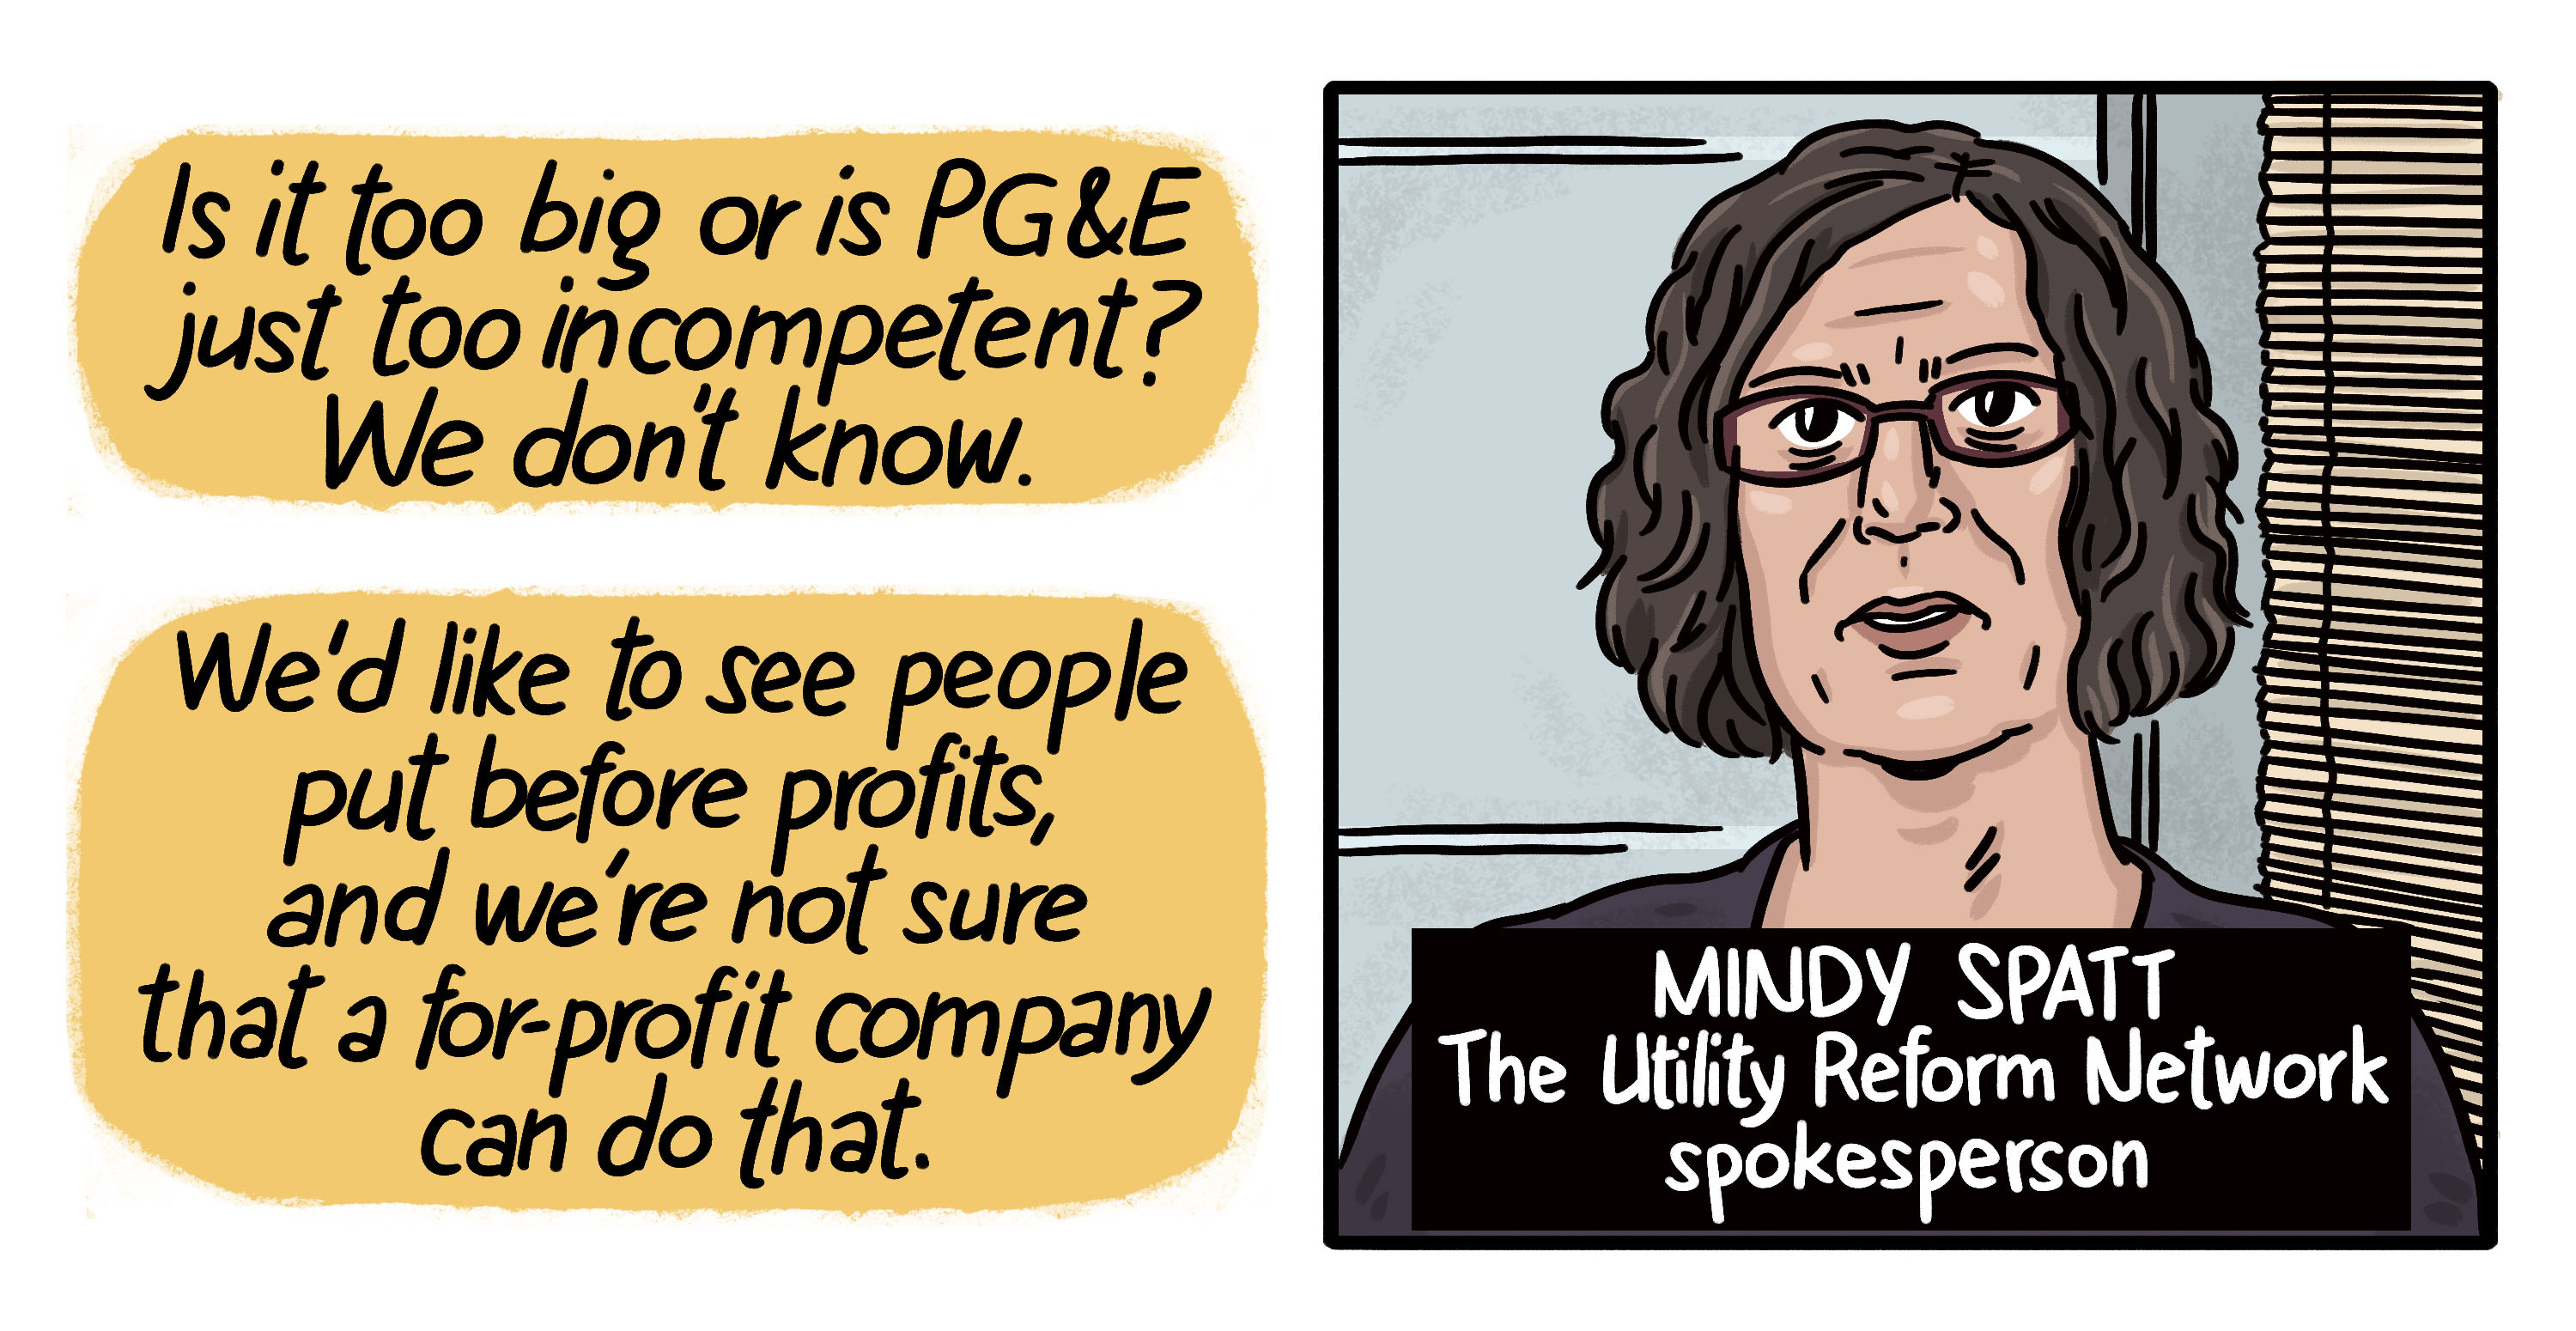 Headshot illustration of Mindy Spatt of The Utility Reform Network, and a quote: 